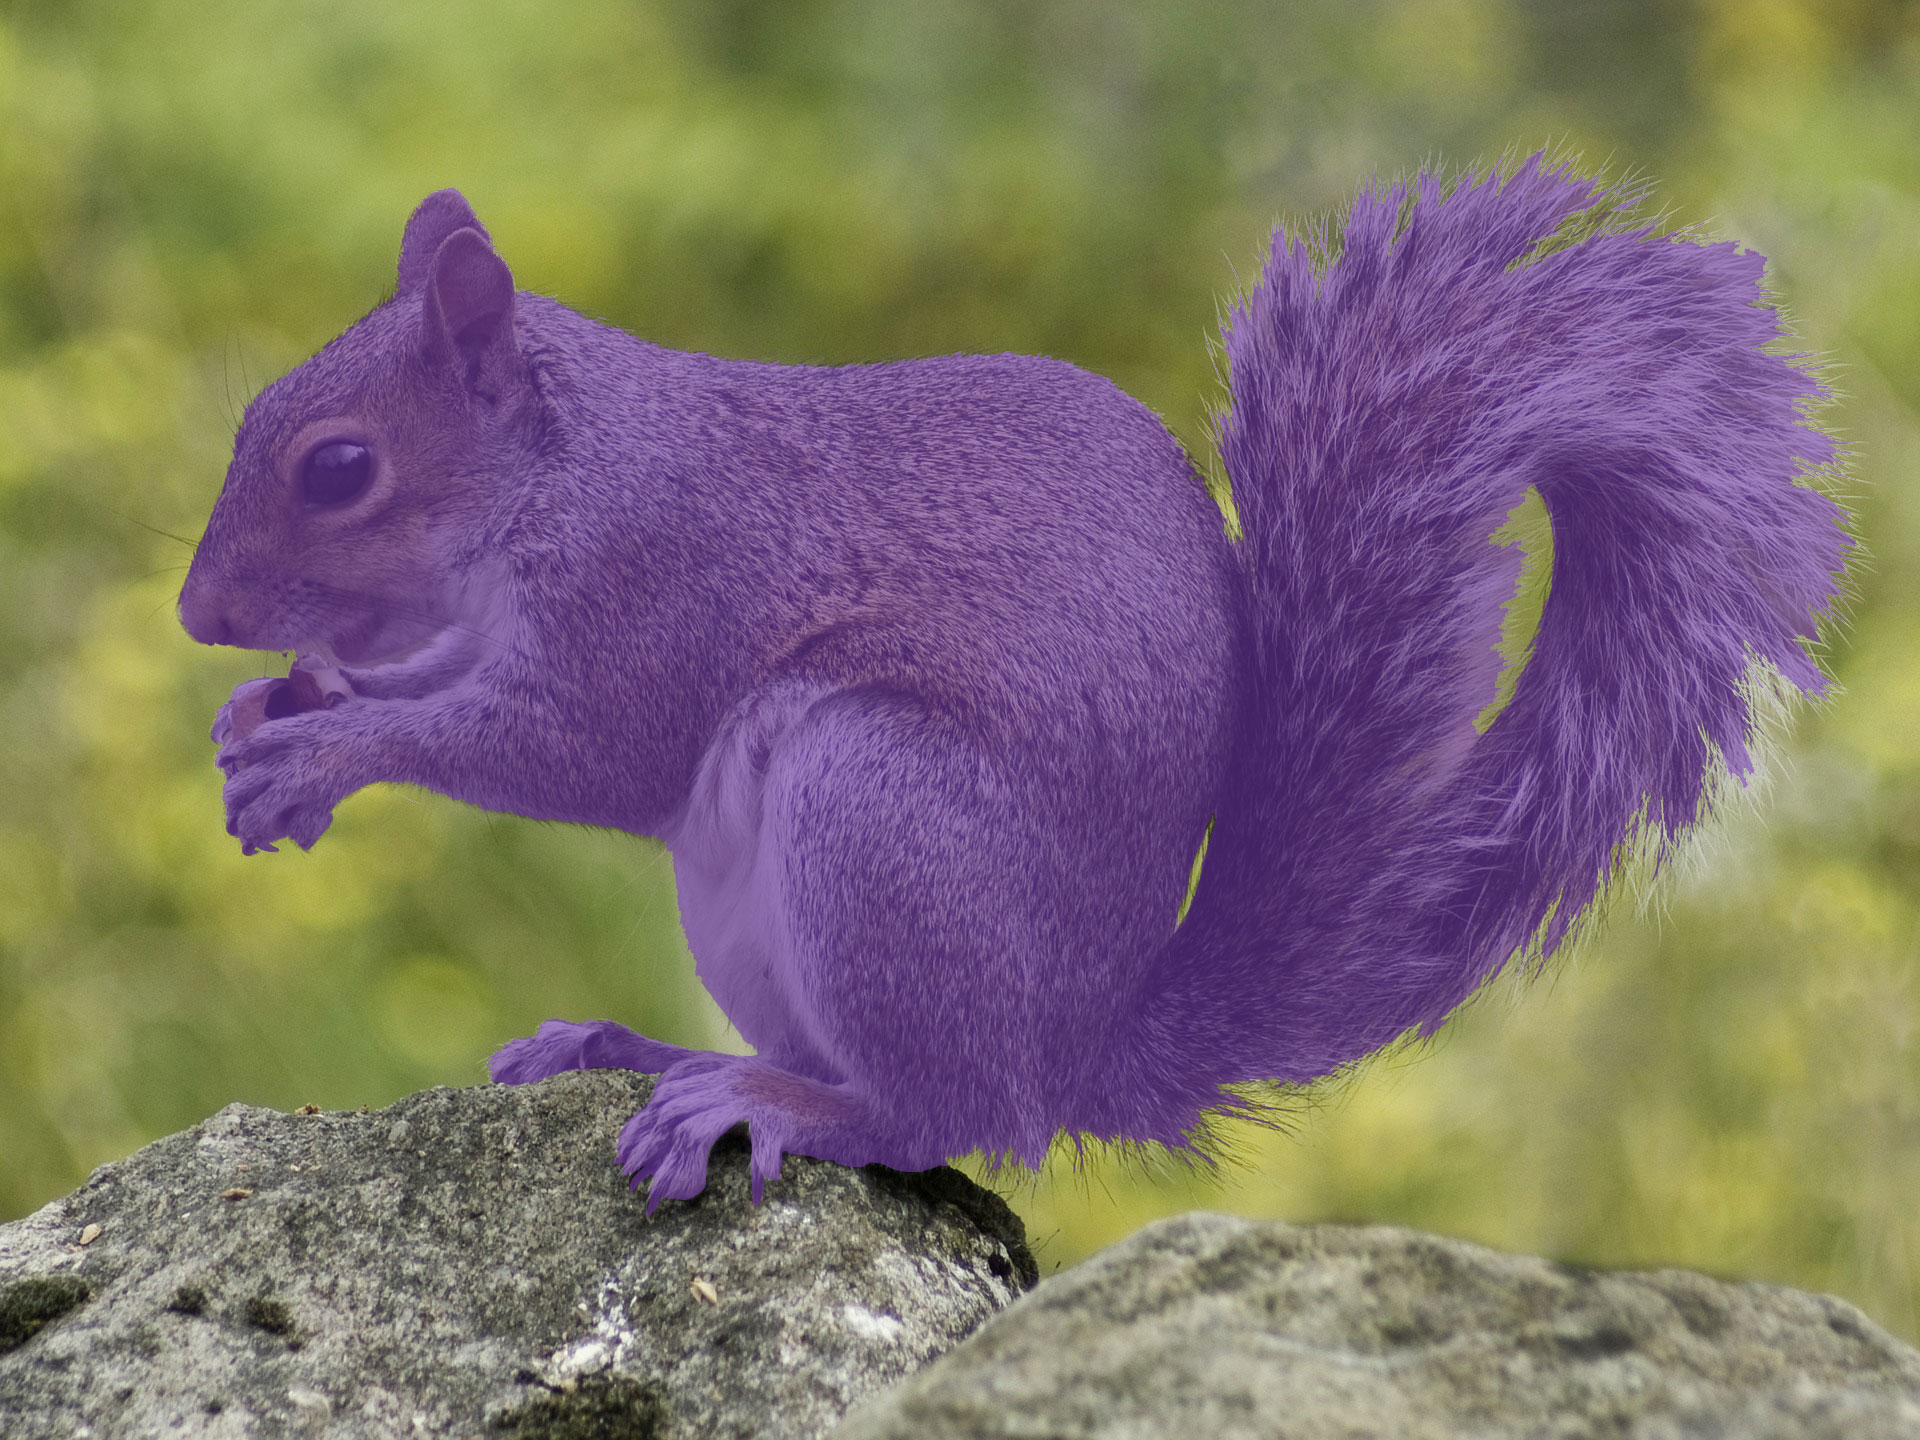 Finding Purple Squirrels: How Using Search Firms Saves Colleges Money